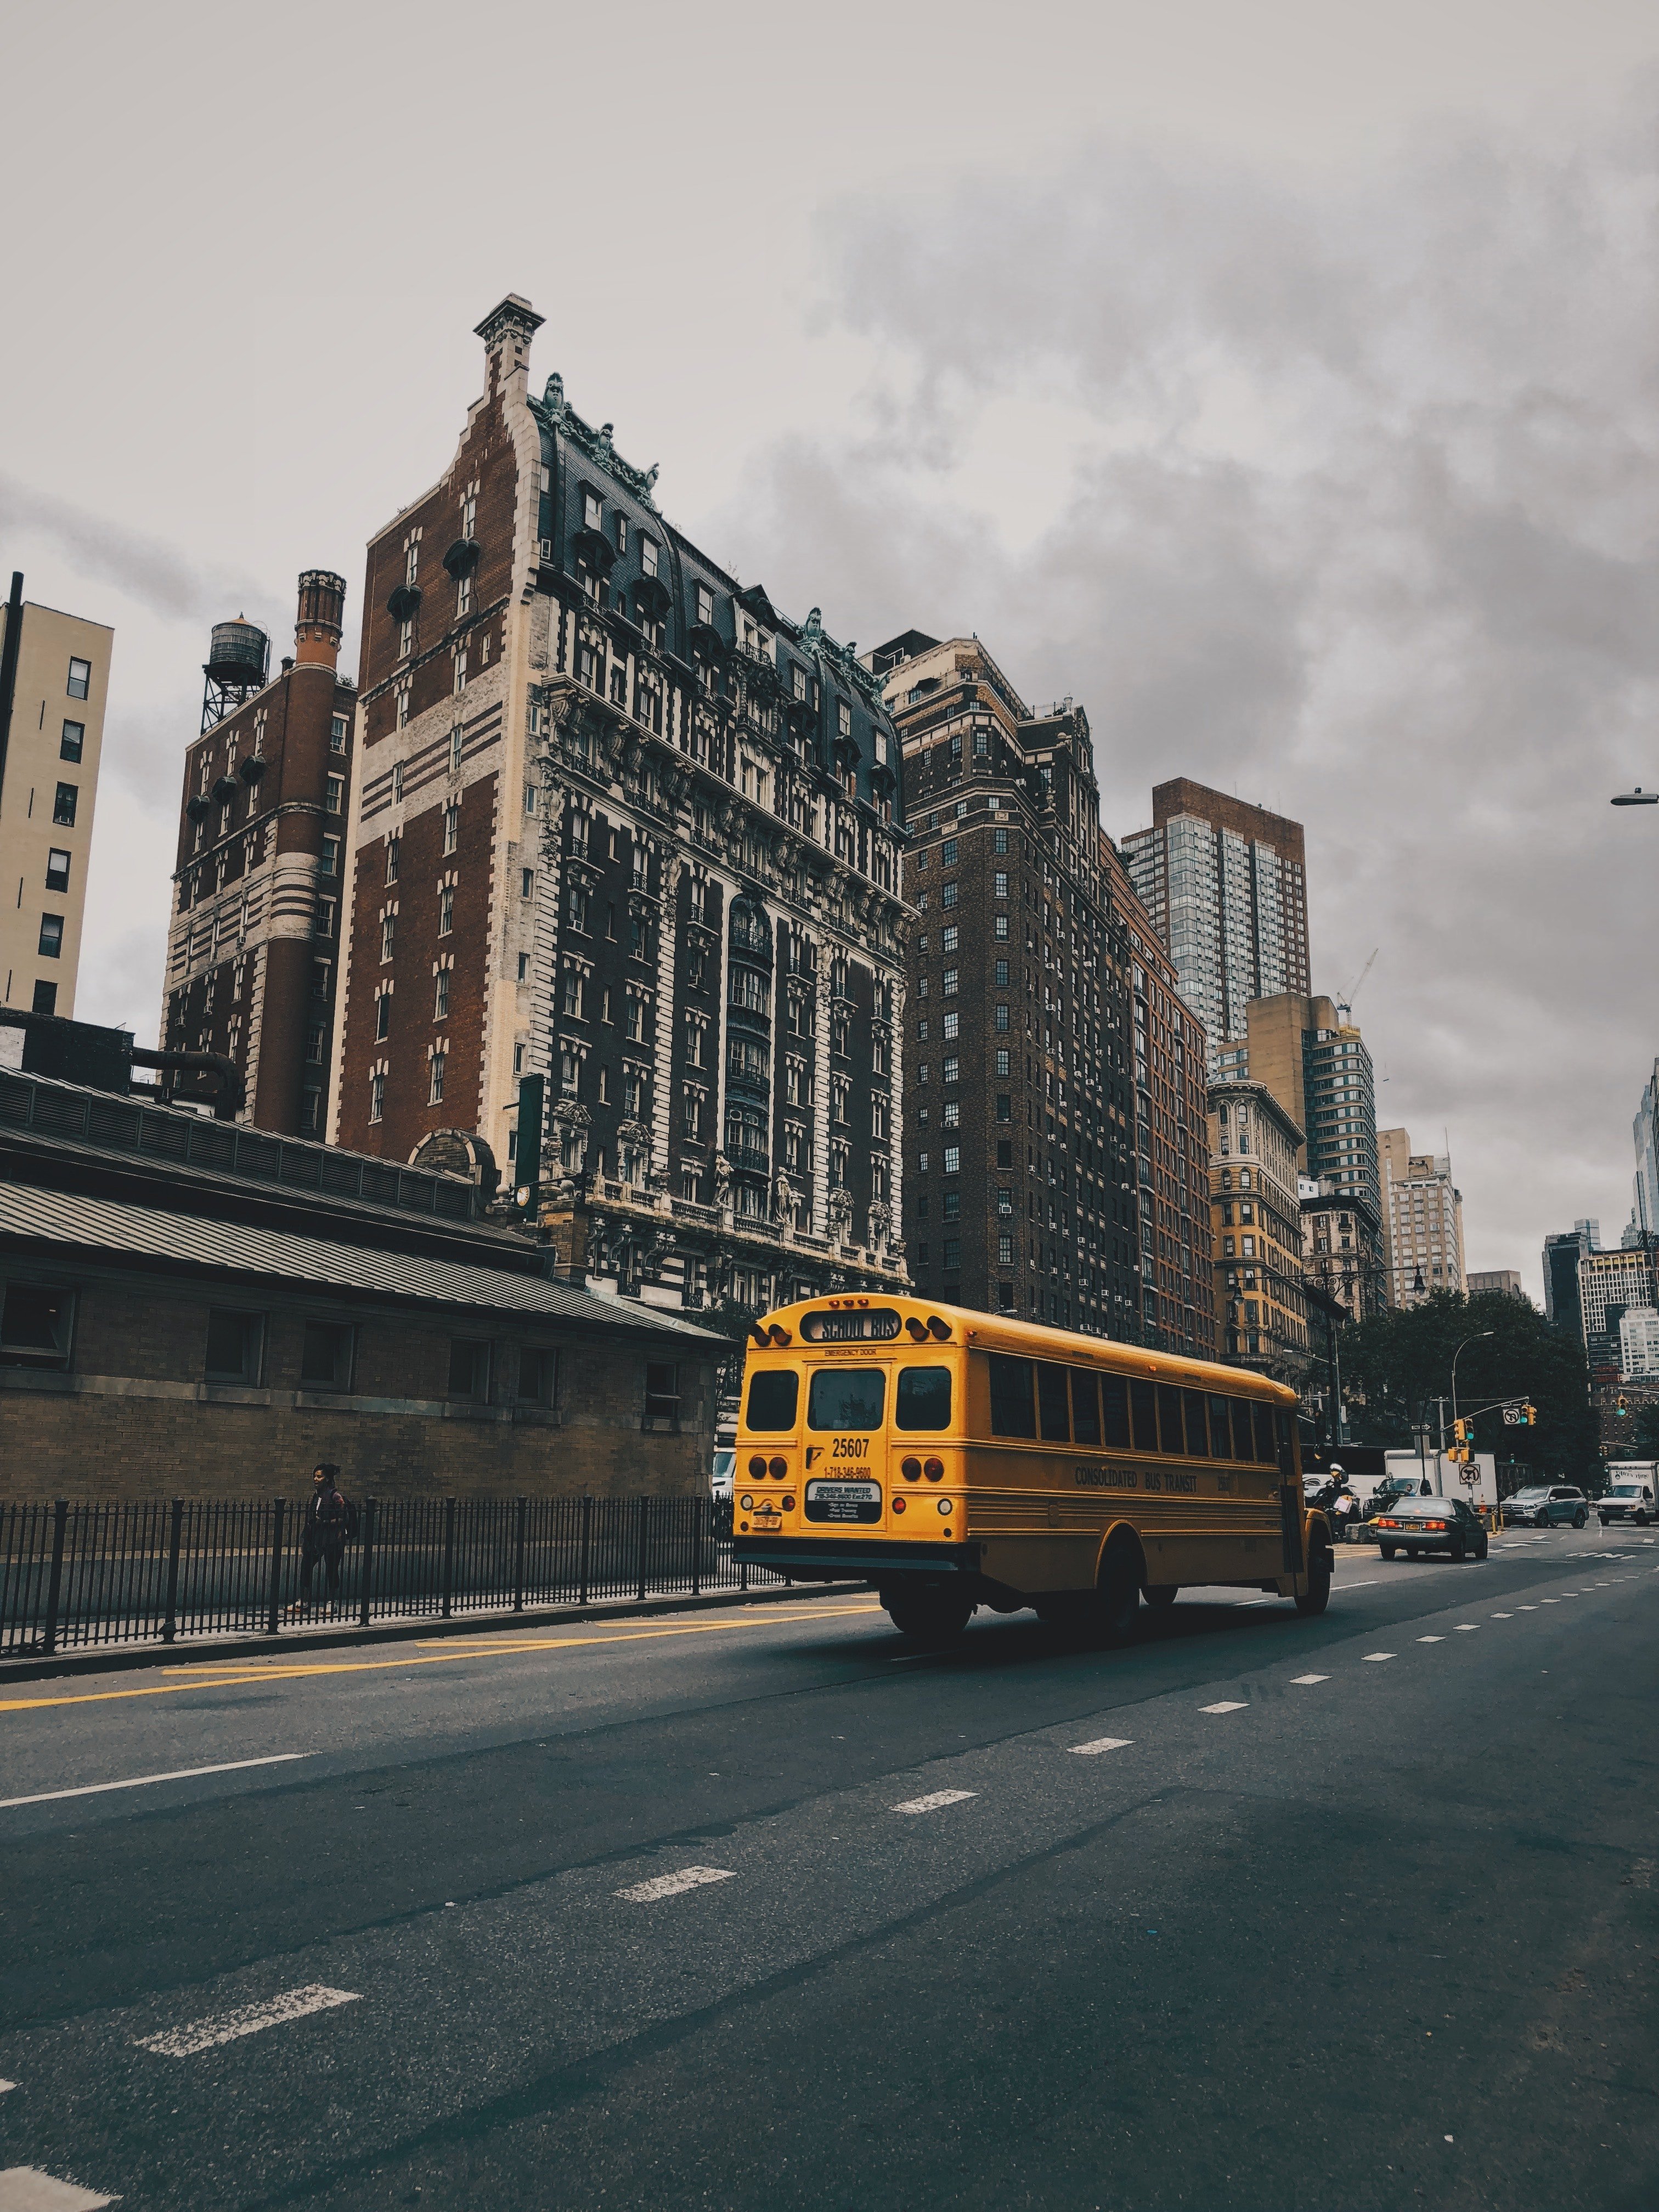 Pictured - A yellow school bus on the road | Source: Pexels 